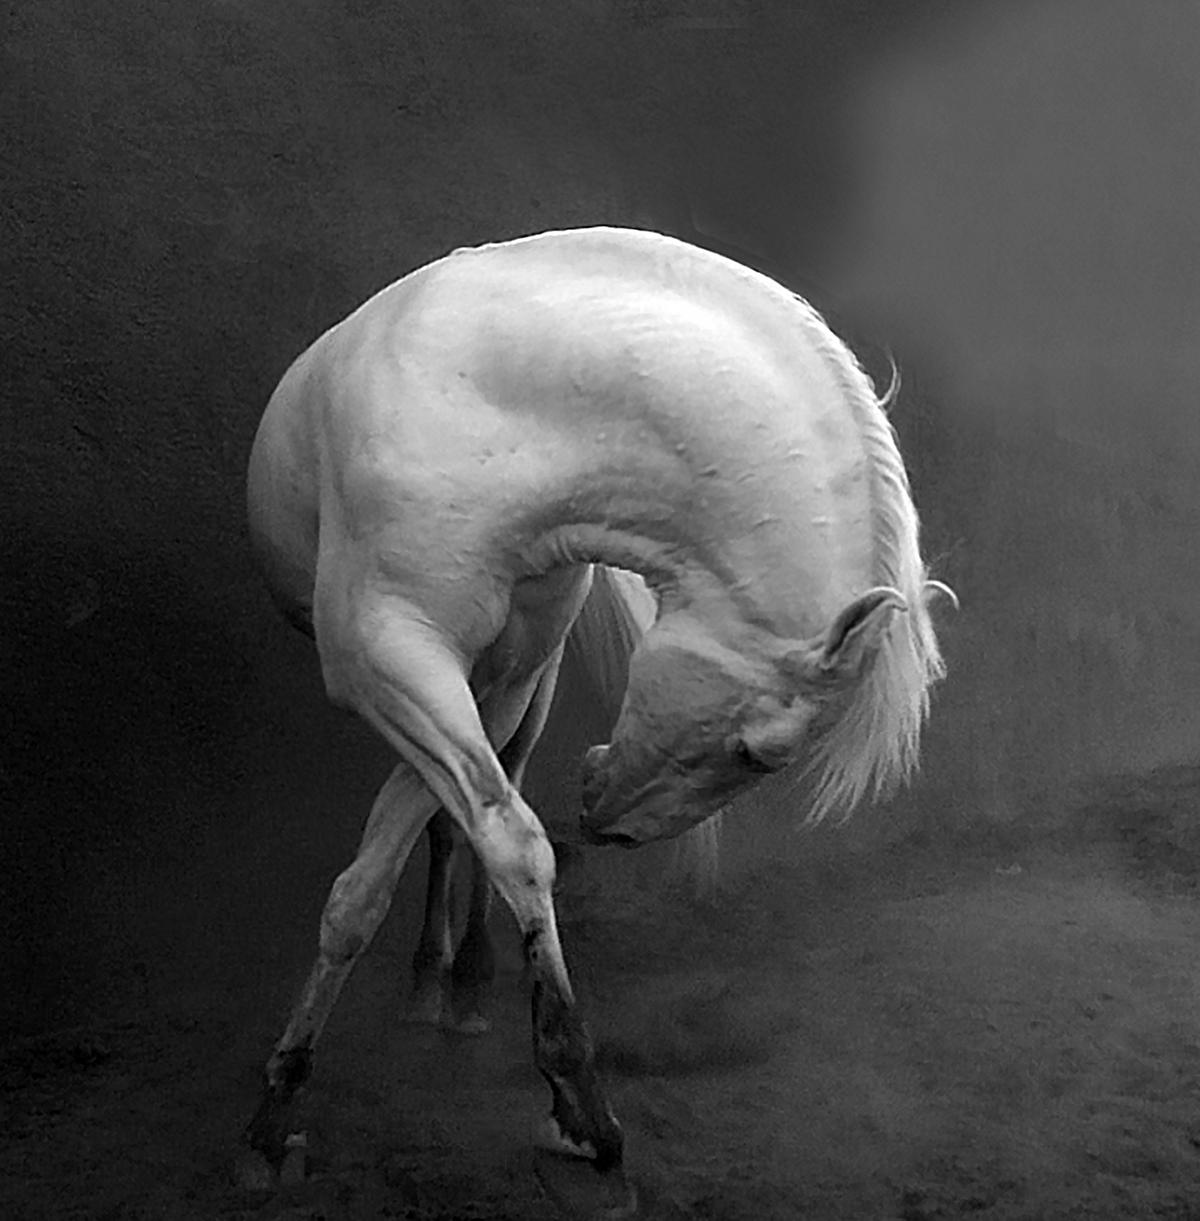 "White Stallion" by Haider Khan, India; "The Marwari or Malani is a rare breed of horse from the Marwar region of Rajasthan in northwest India, with an unusual, inward-curving ear shape." (© Haider Khan, India, Winner, National Awards, Natural World & Wildlife, 2022 Sony World Photography Awards)